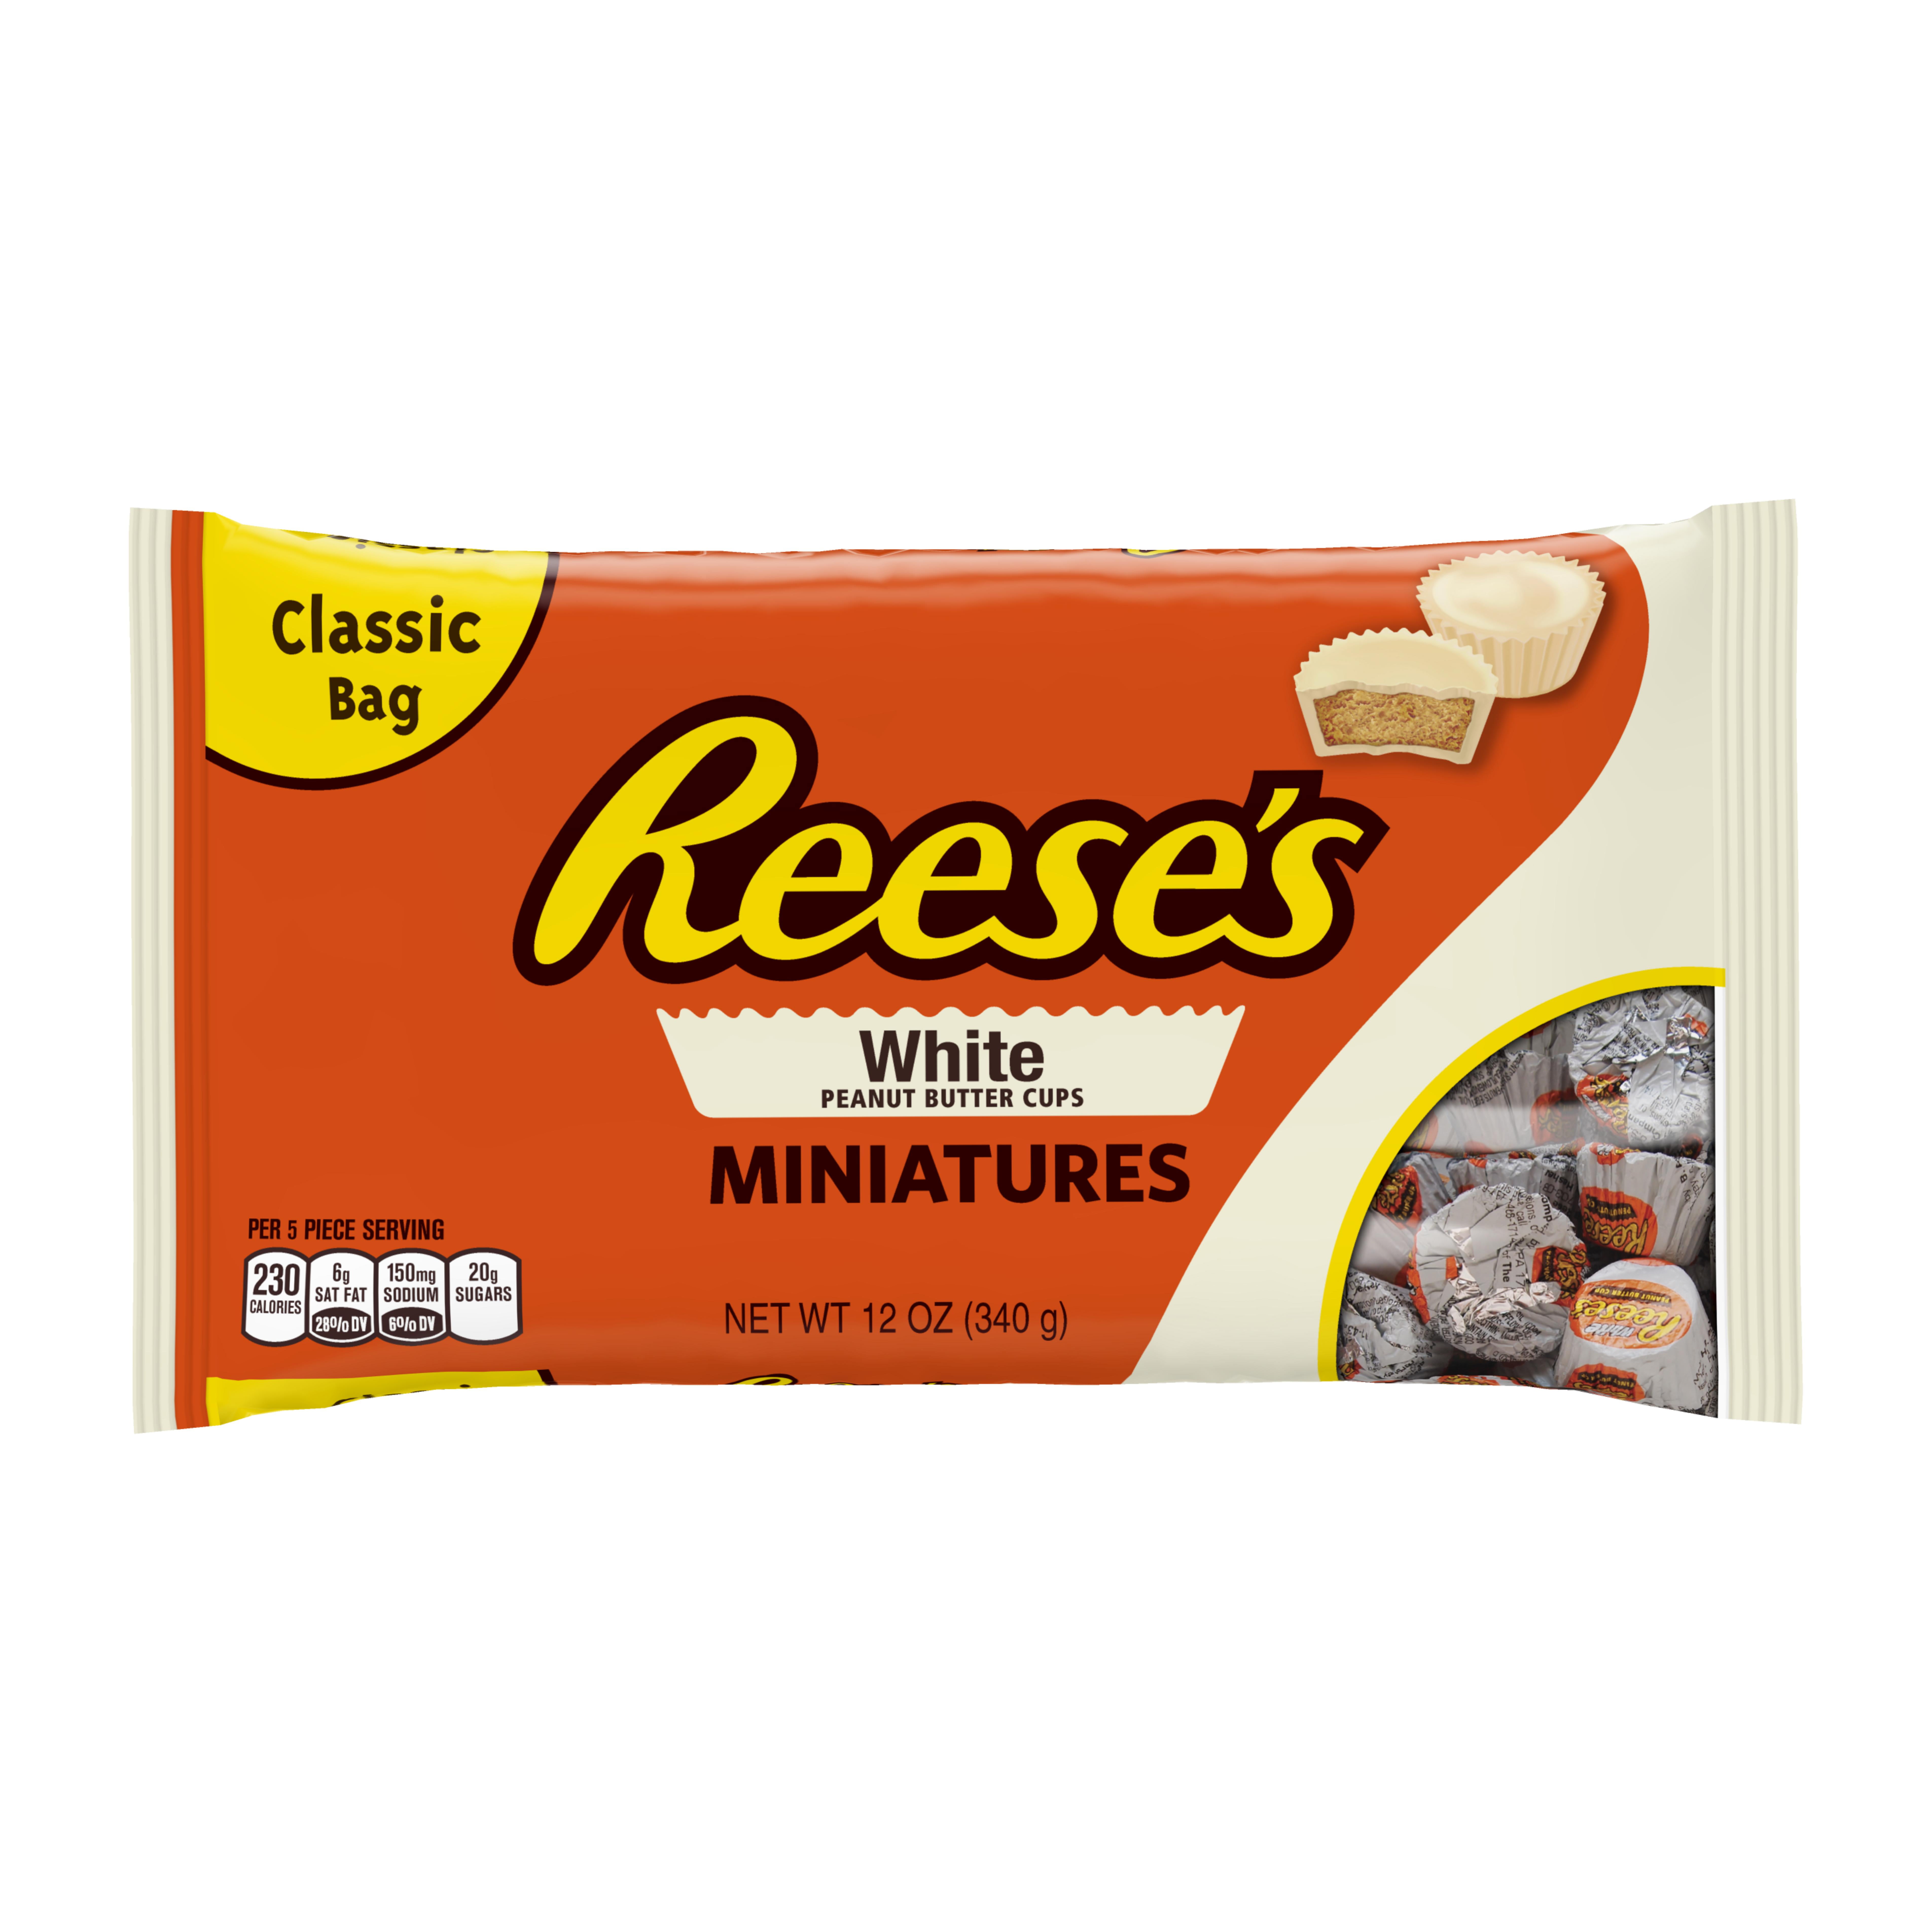 Butter cups. Reese's Peanut Butter Cup Miniatures. Reeses белый шоколад. Reese's Buttercup Minis. Peanut Butter Cups.